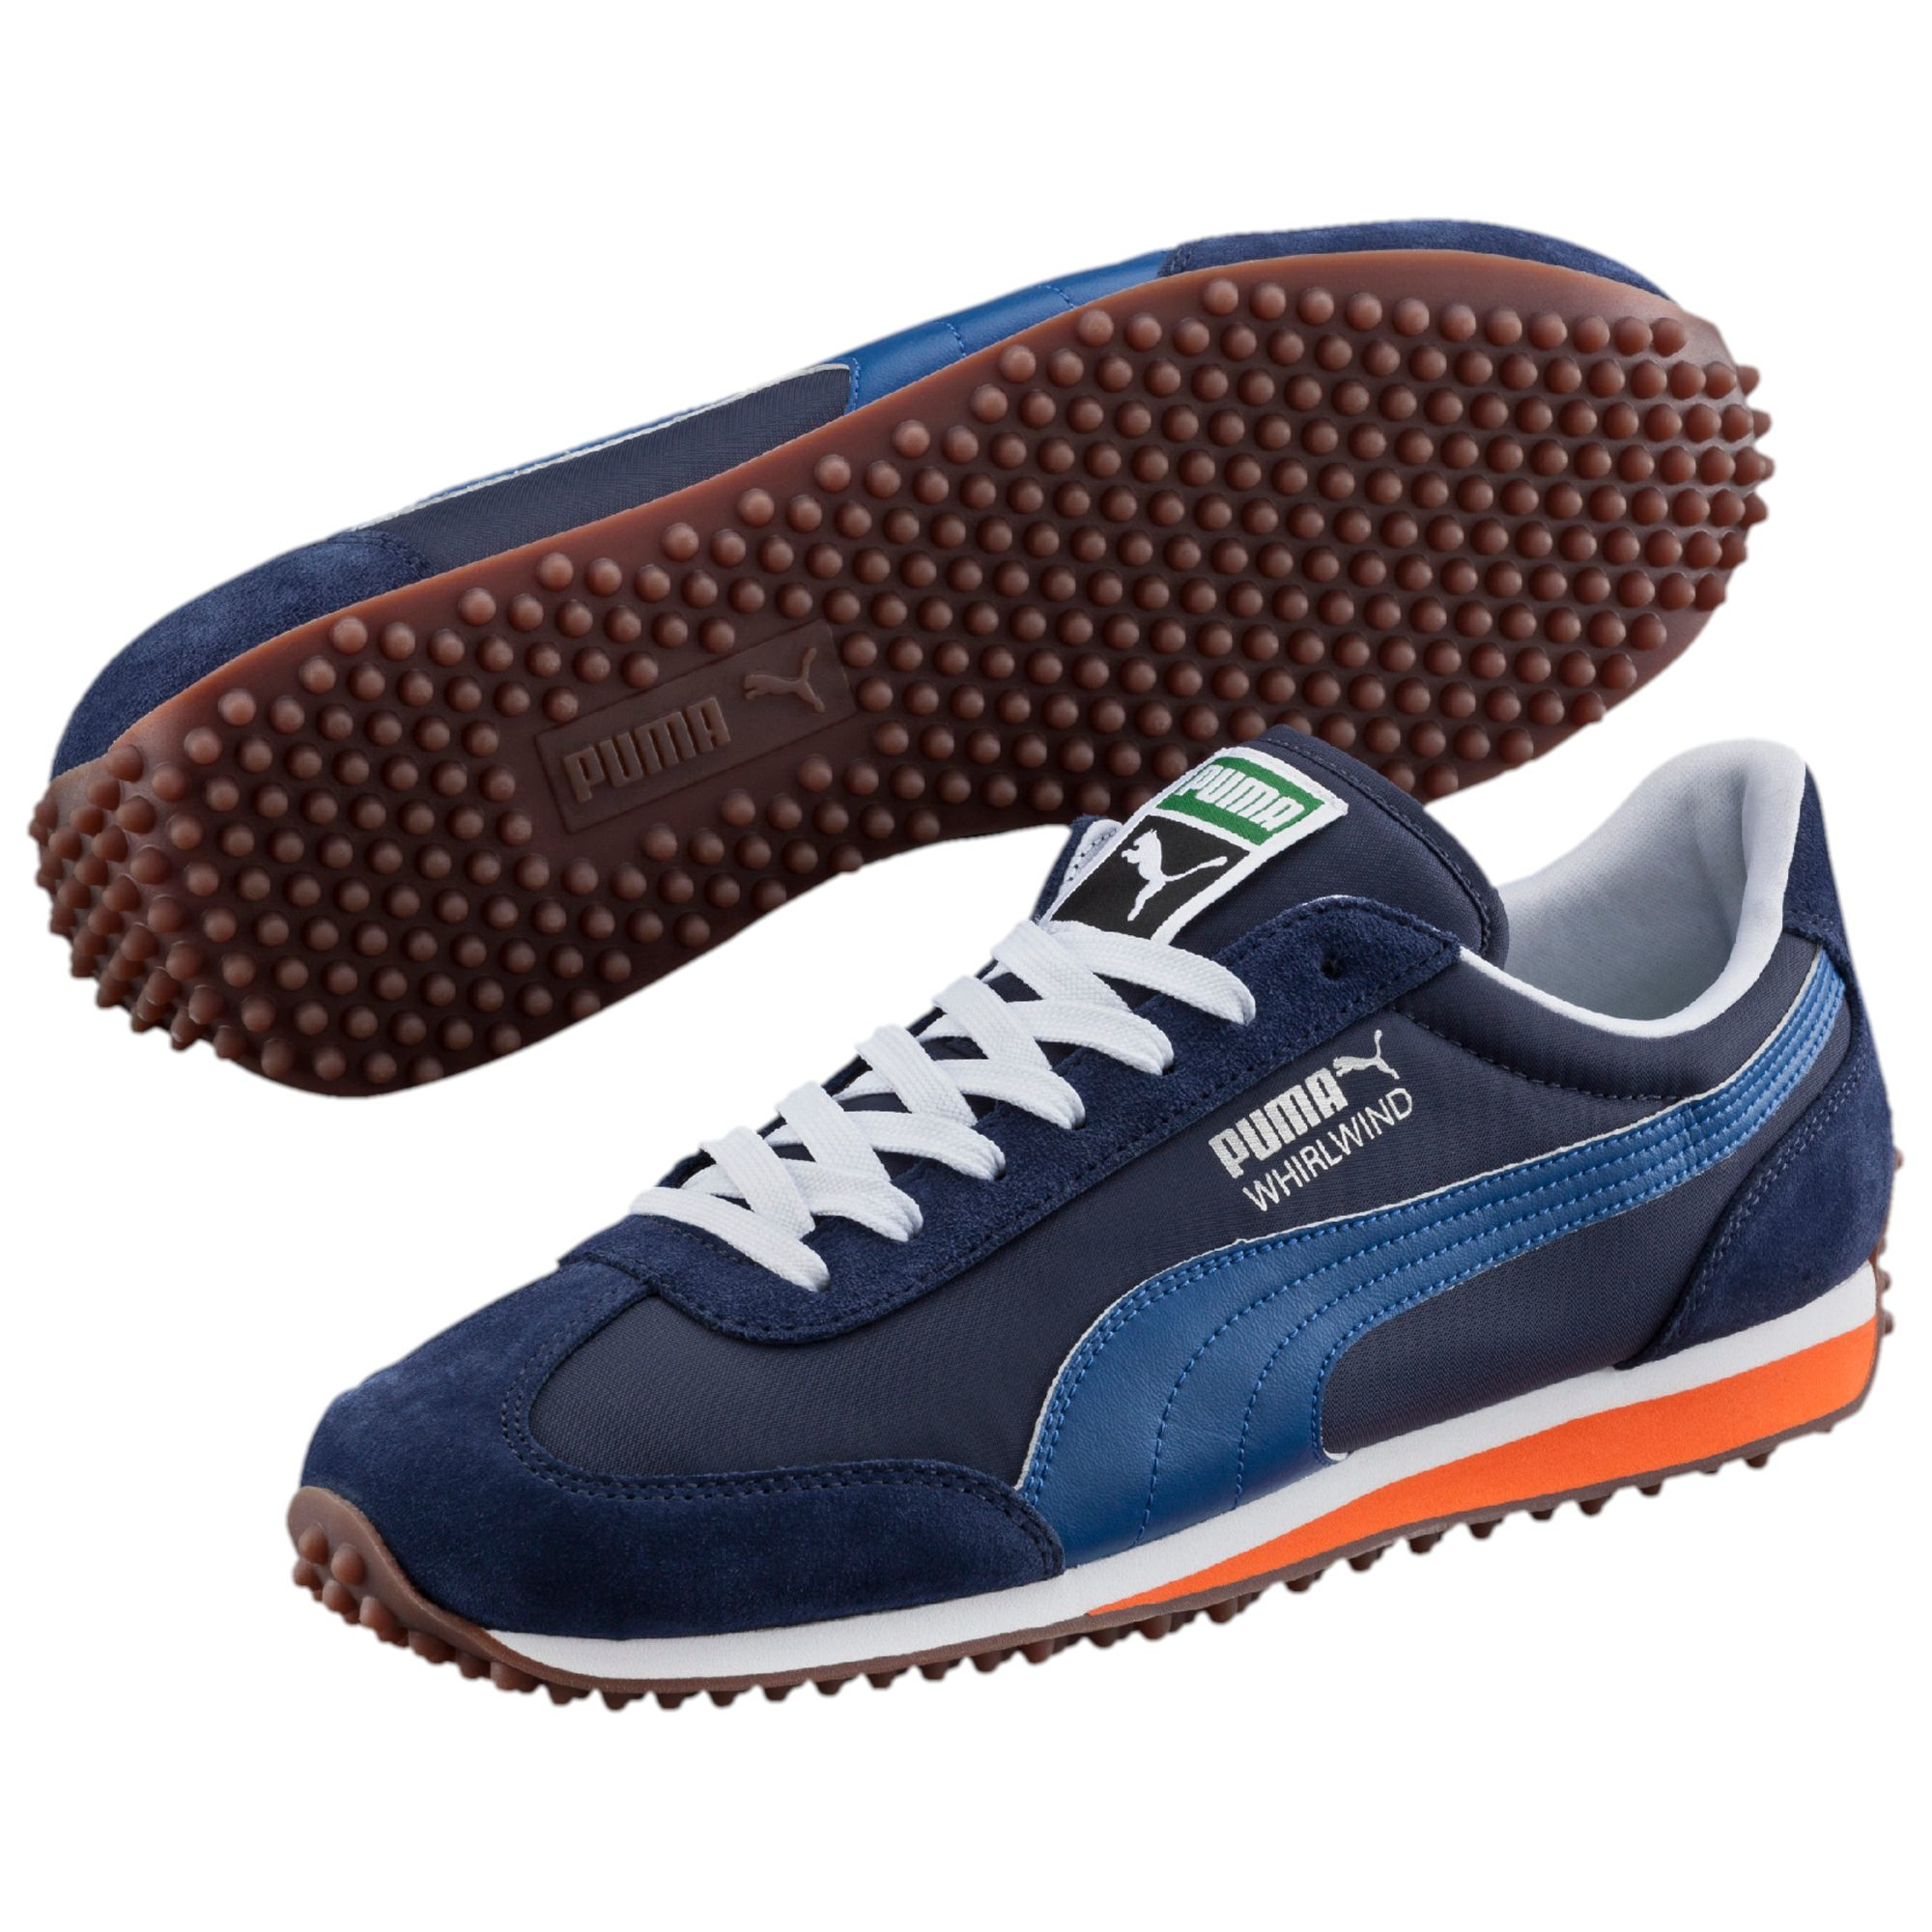 Lyst - Puma Whirlwind Classic Men's Sneakers in Blue for Men